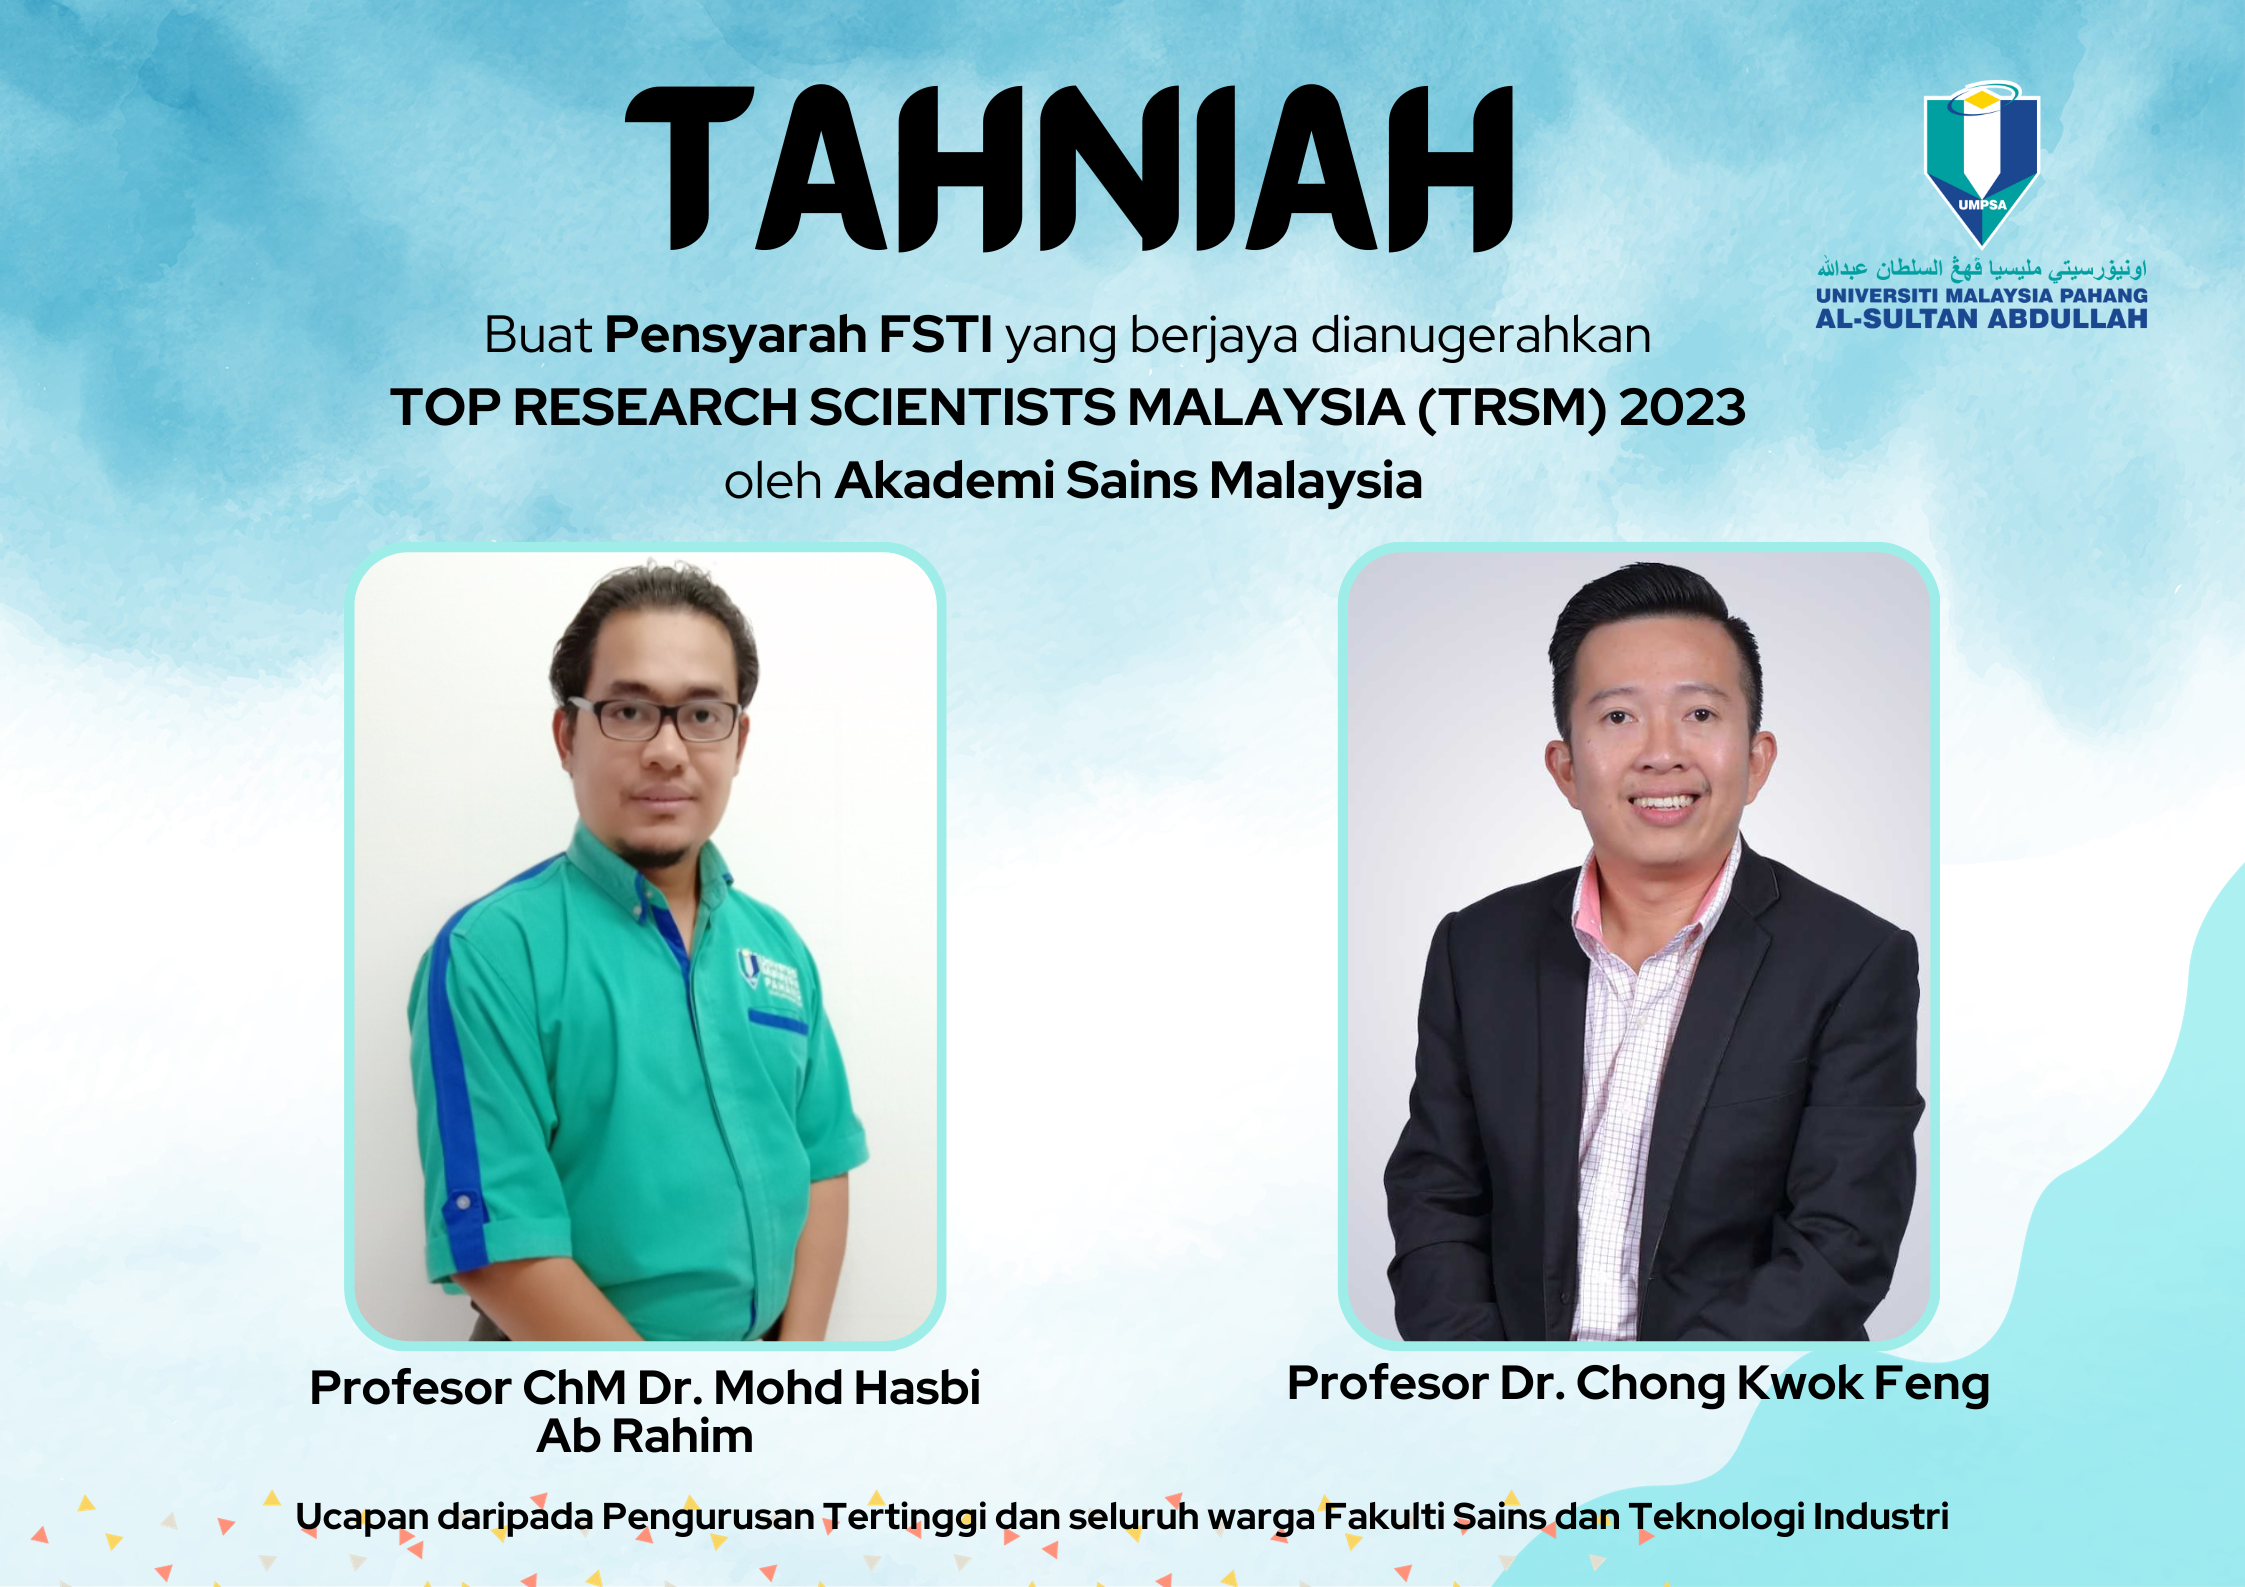 TOP RESEARCH SCIENTISTS MALAYSIA (TRSM) 2023 